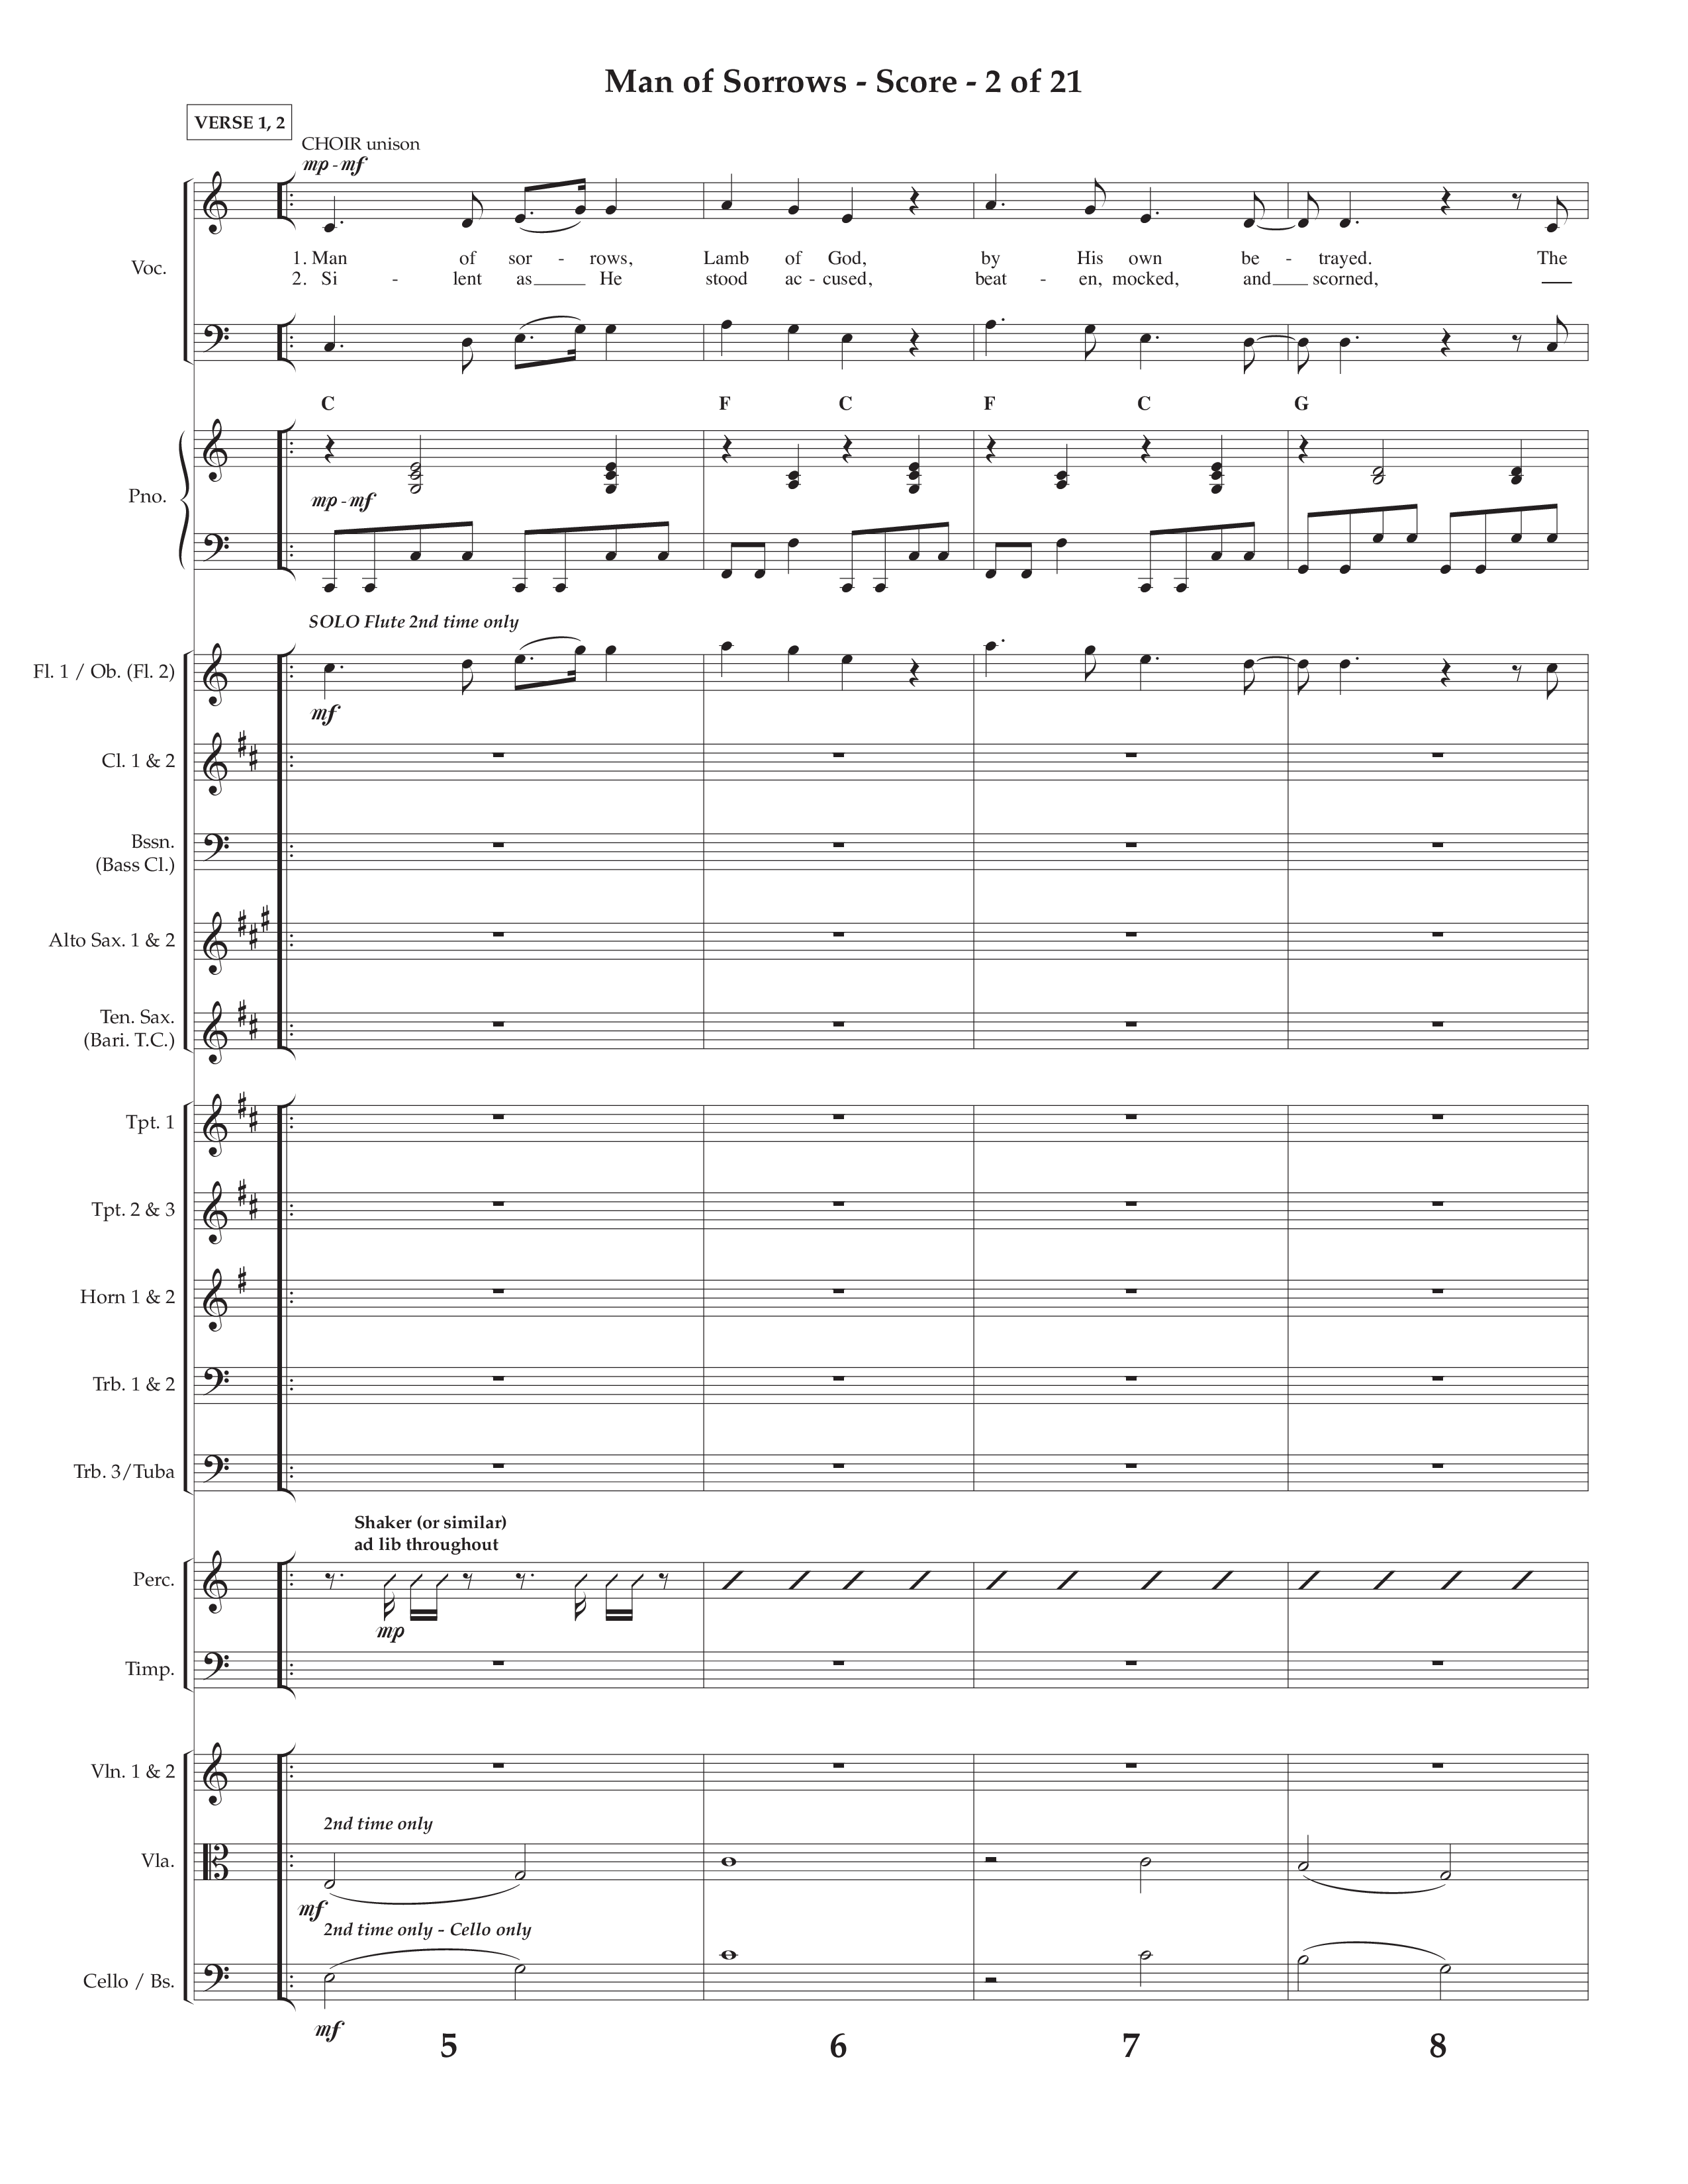 Man Of Sorrows (Choral Anthem SATB) Conductor's Score (Lifeway Choral / Arr. Cliff Duren / Orch. Keith Christopher)